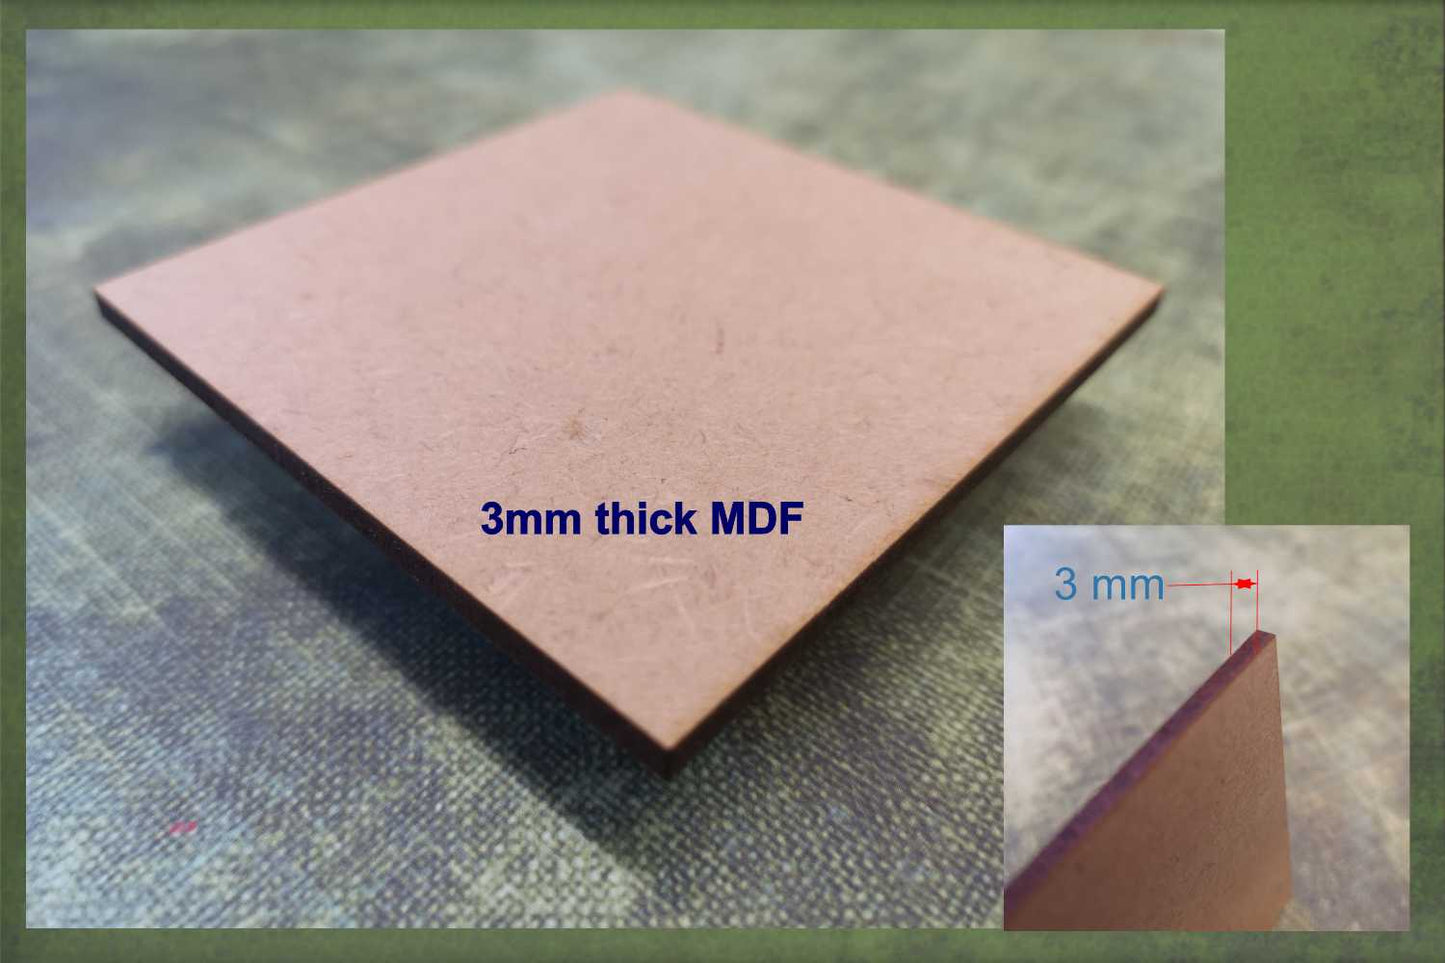 3mm thick MDF used to make the Duck with Santa hat cut-outs ready for crafting